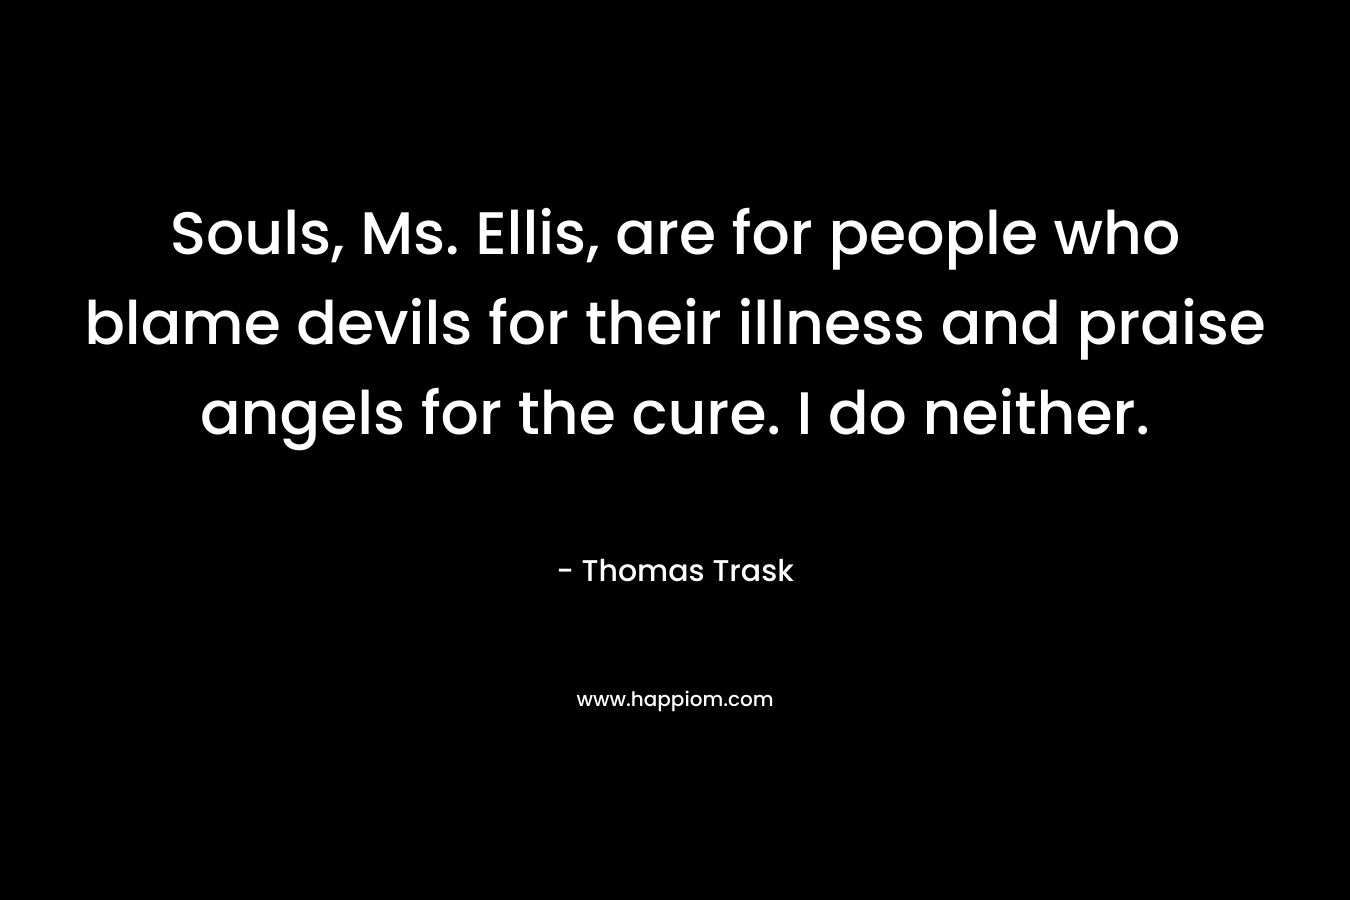 Souls, Ms. Ellis, are for people who blame devils for their illness and praise angels for the cure. I do neither. – Thomas Trask